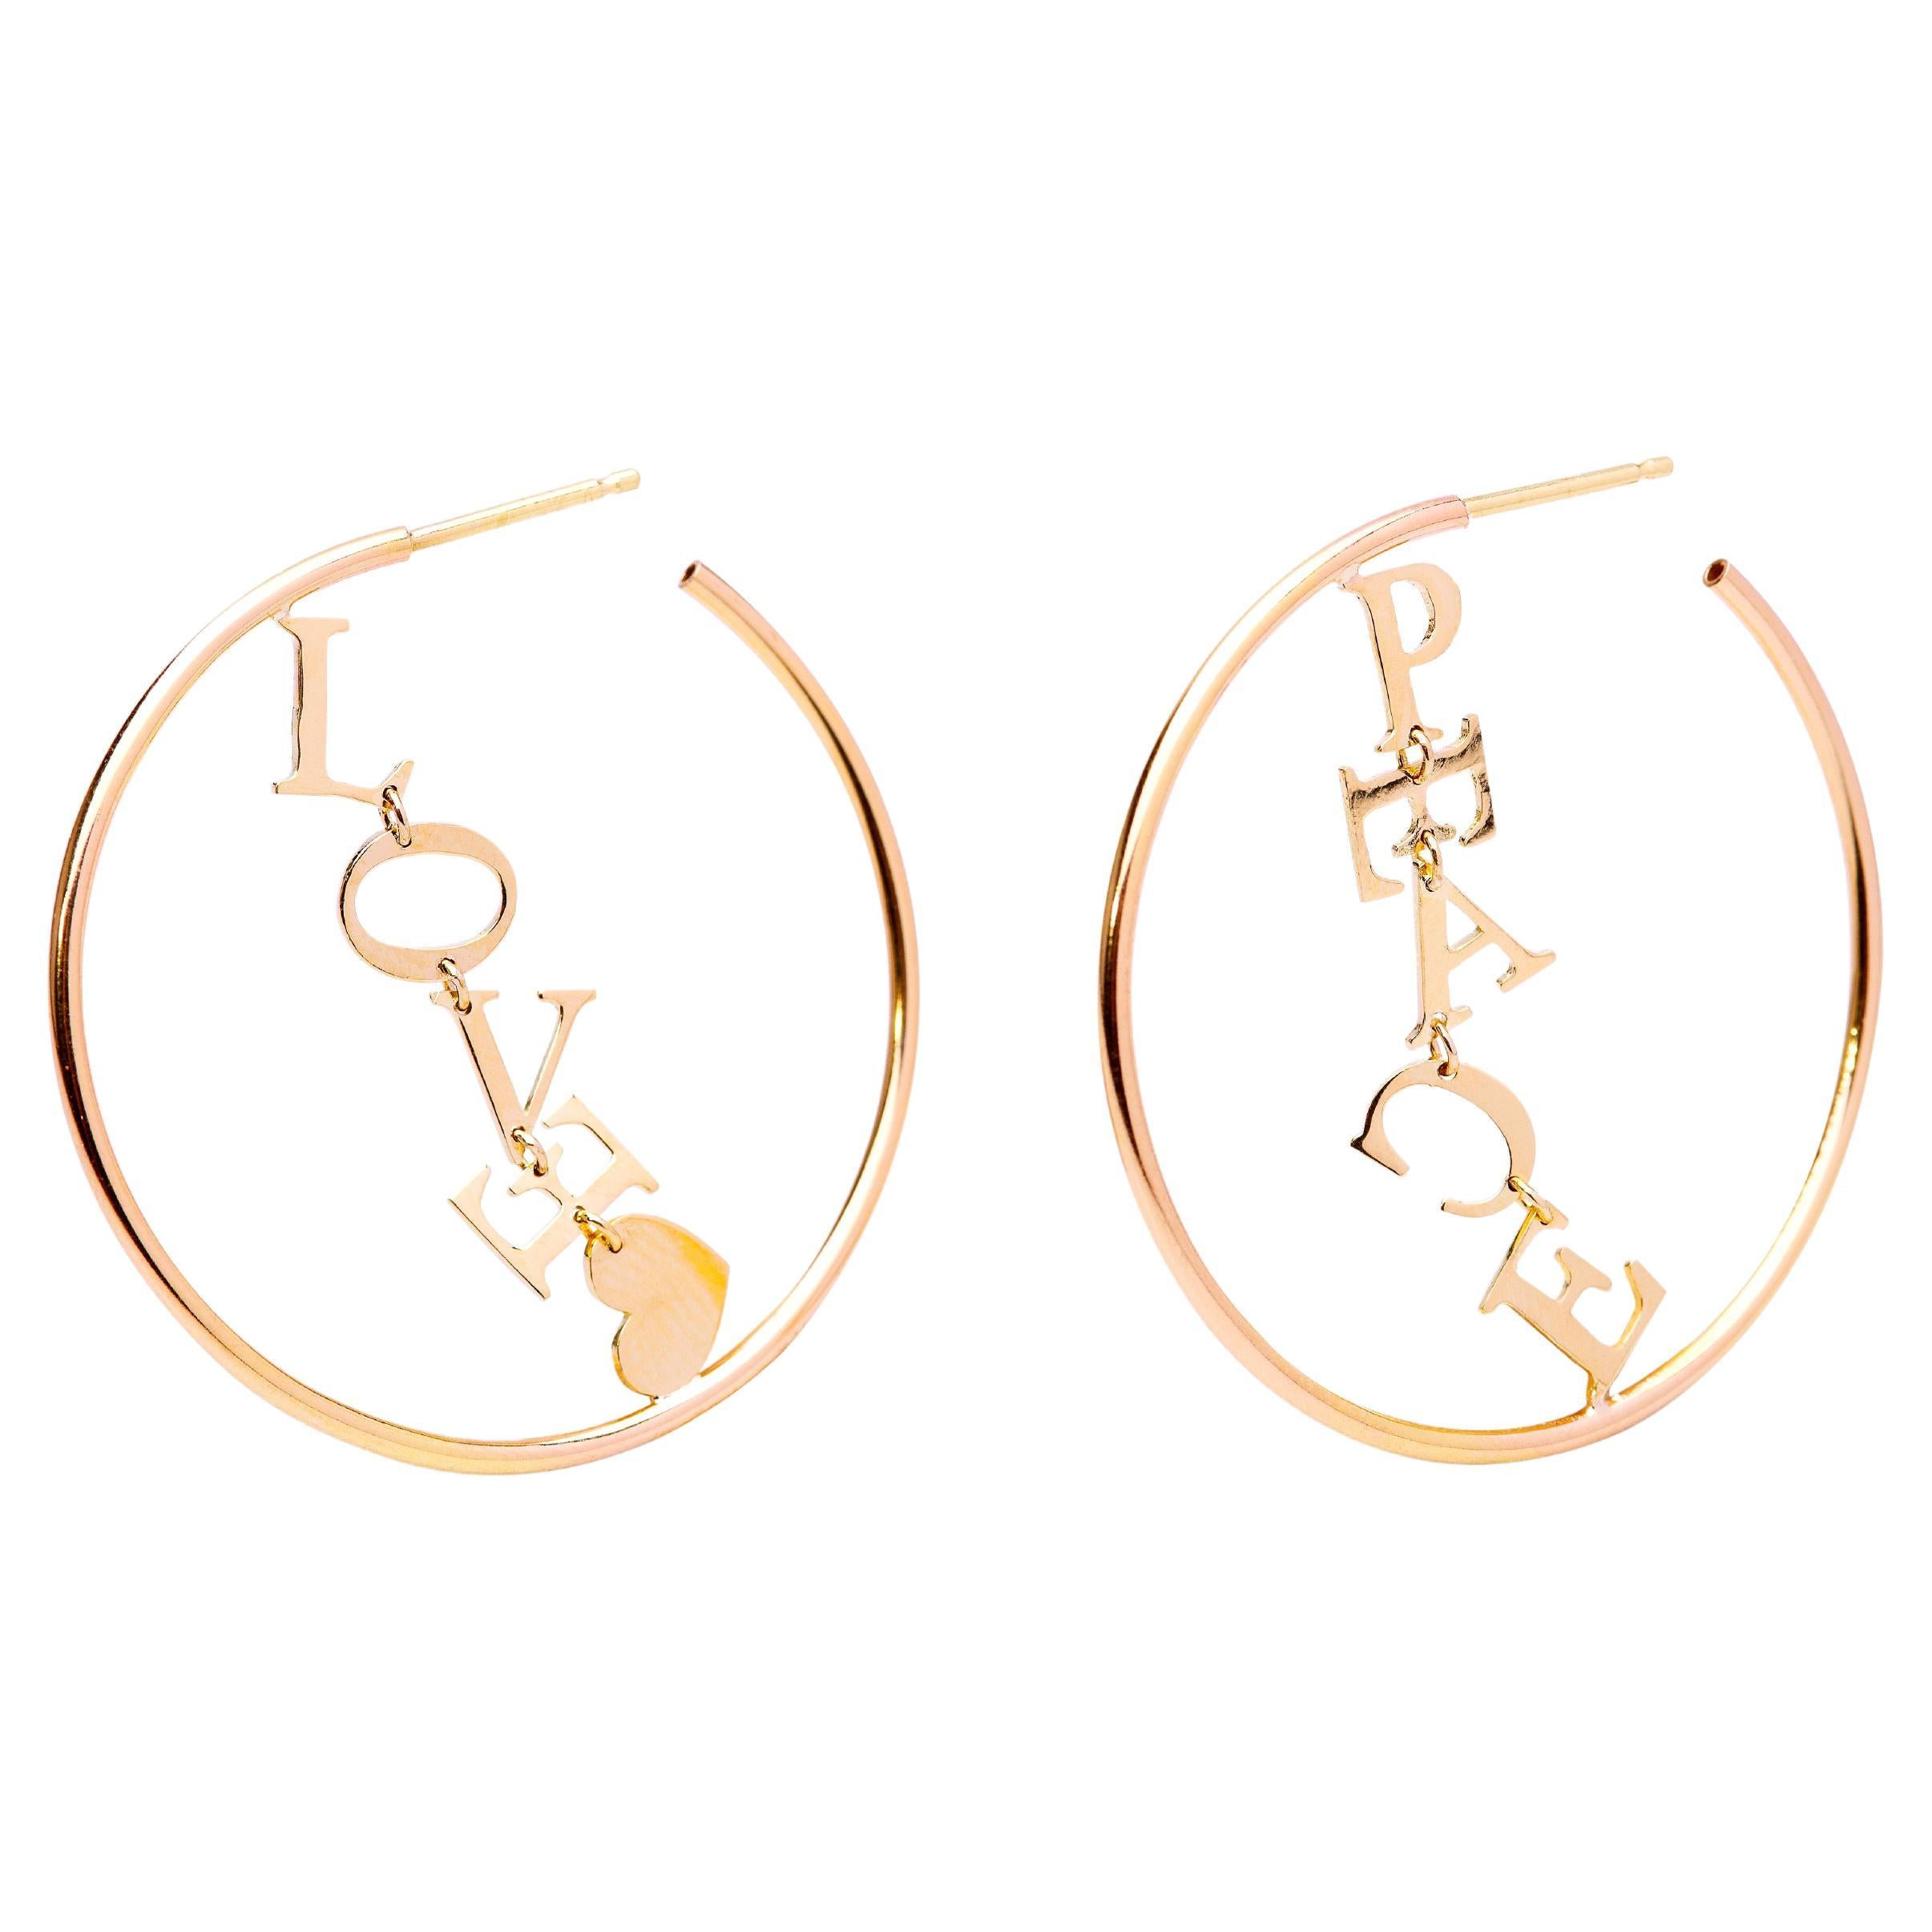 18 Karat Yellow Gold Hoops "Peace & Love" Modern Handcrafted Design Earrings For Sale